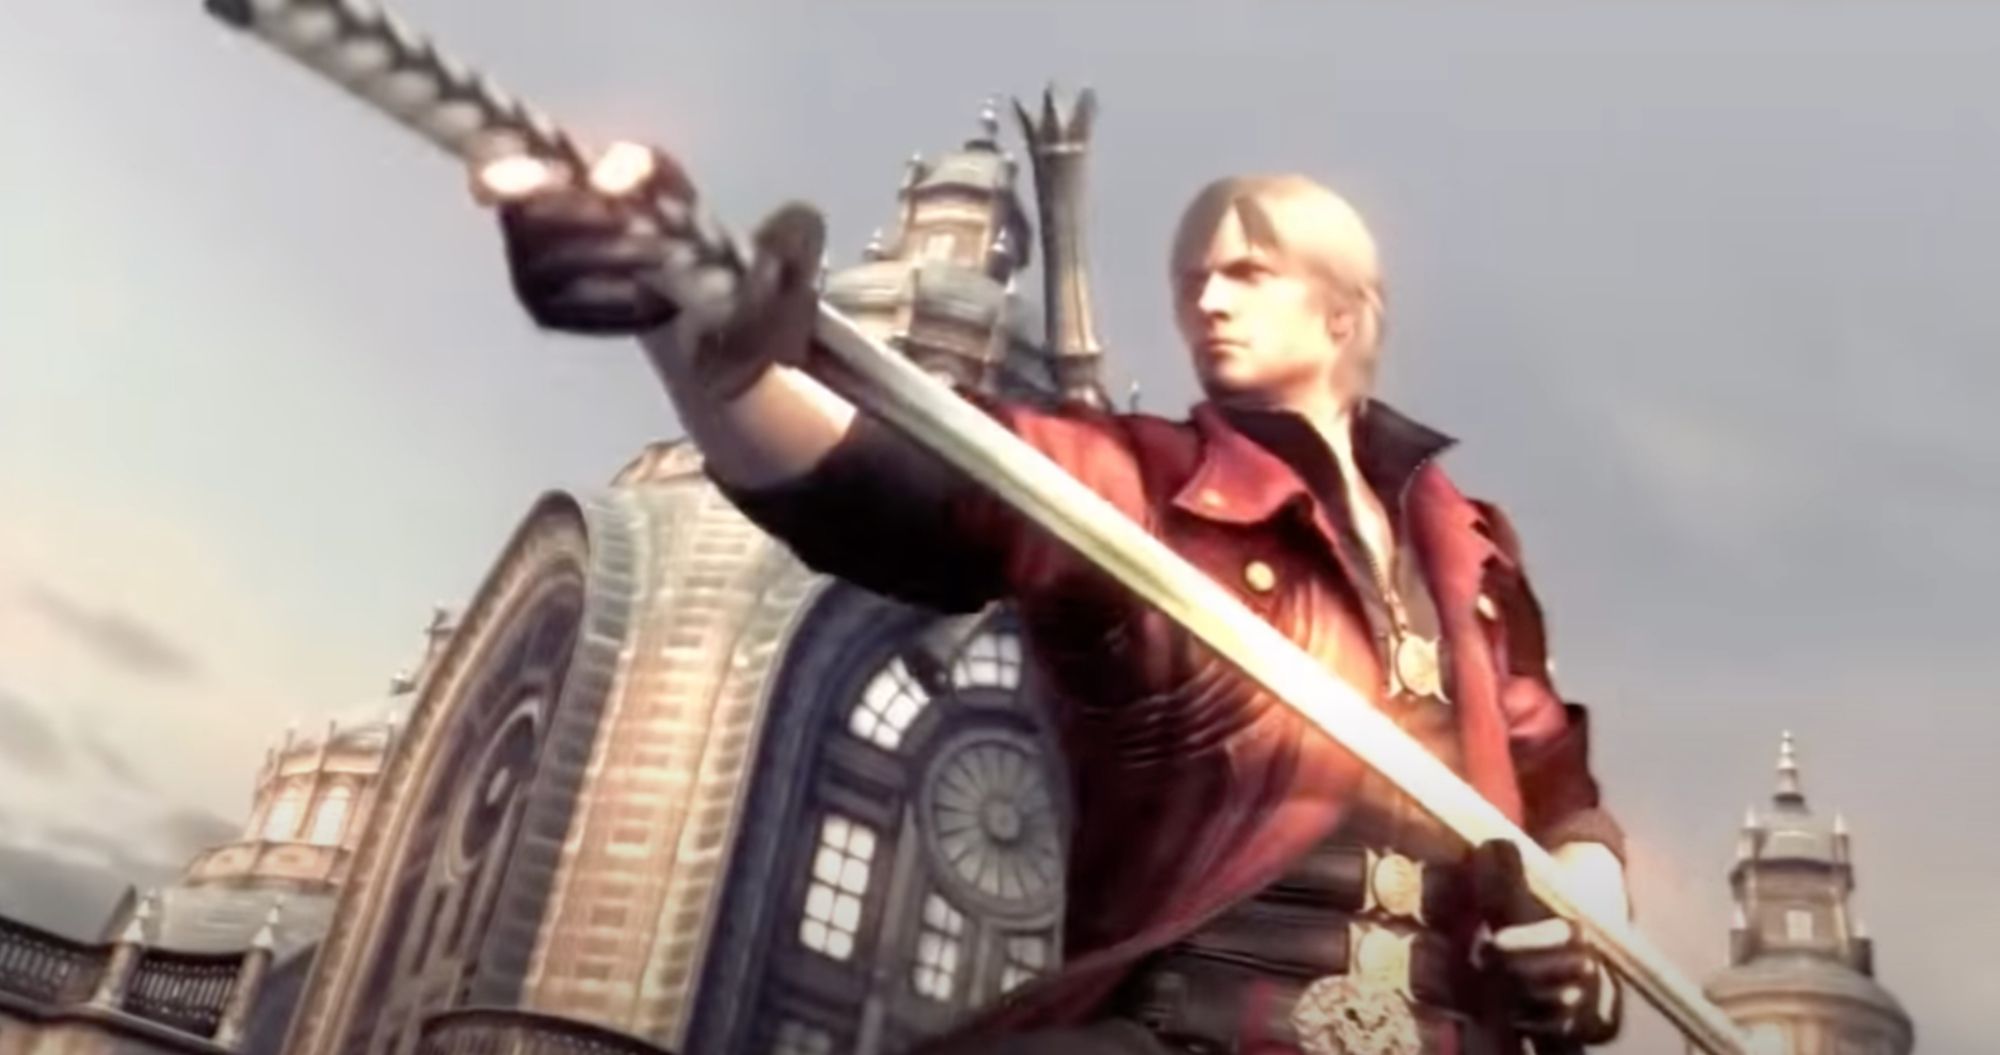 Devil May Cry Dante wields the Yamato Sword